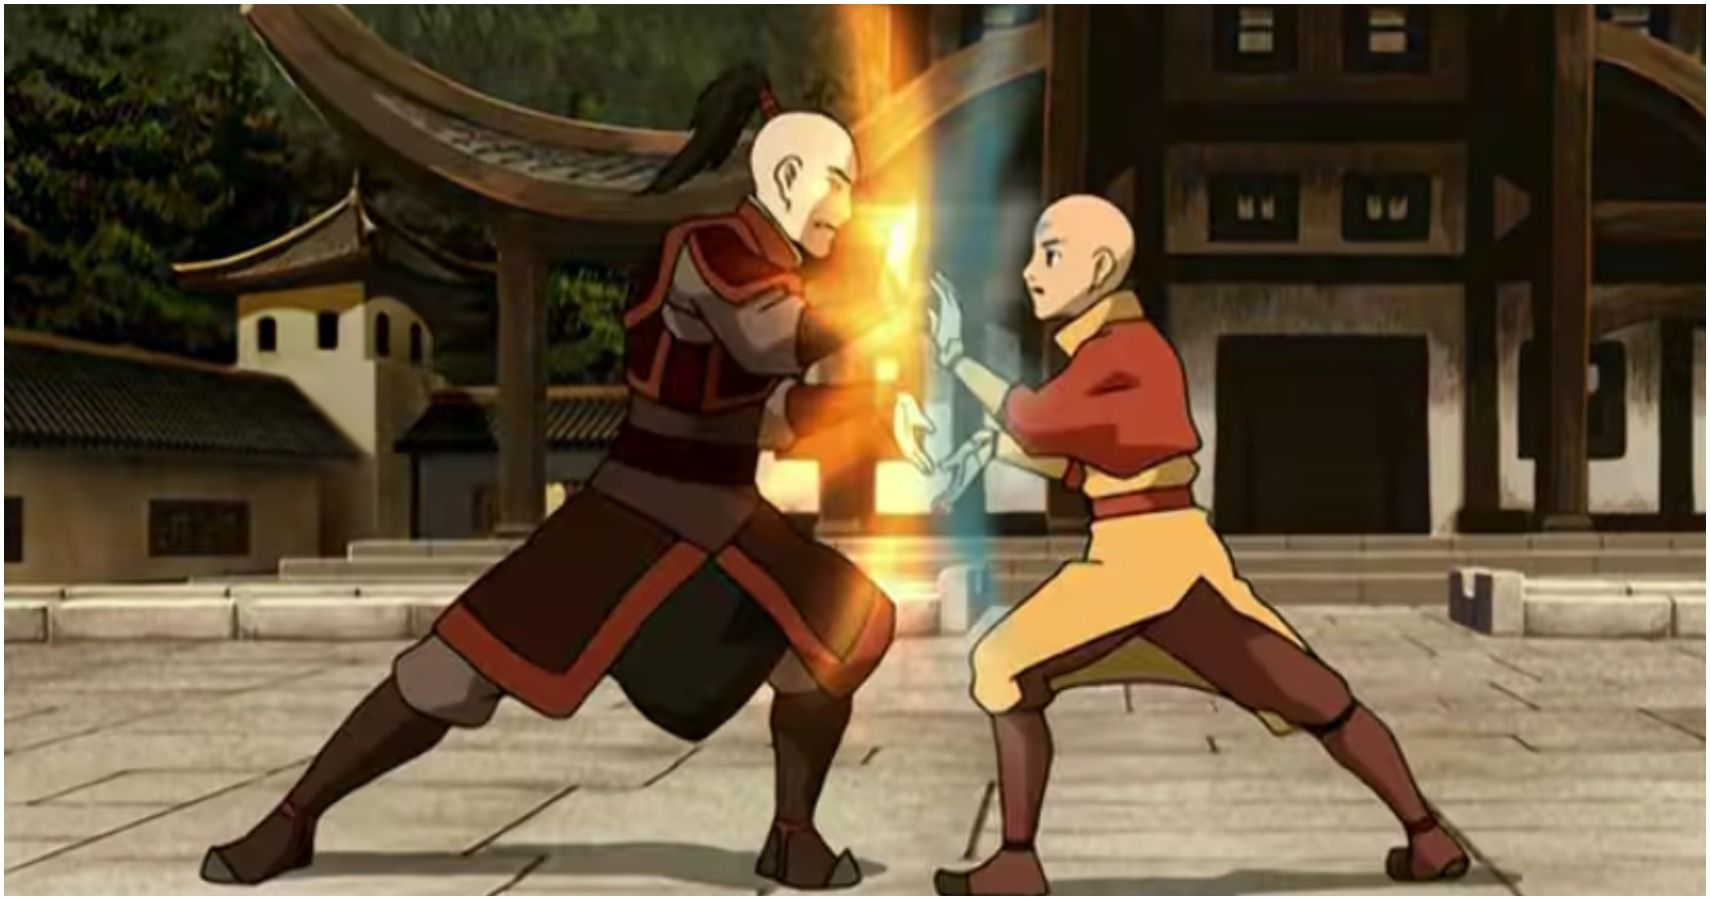 Avatar The Last Airbender  Final Battle Aang Book Three Fire 5 Scale  Action Figure by McFarlane Toys  Popcultcha